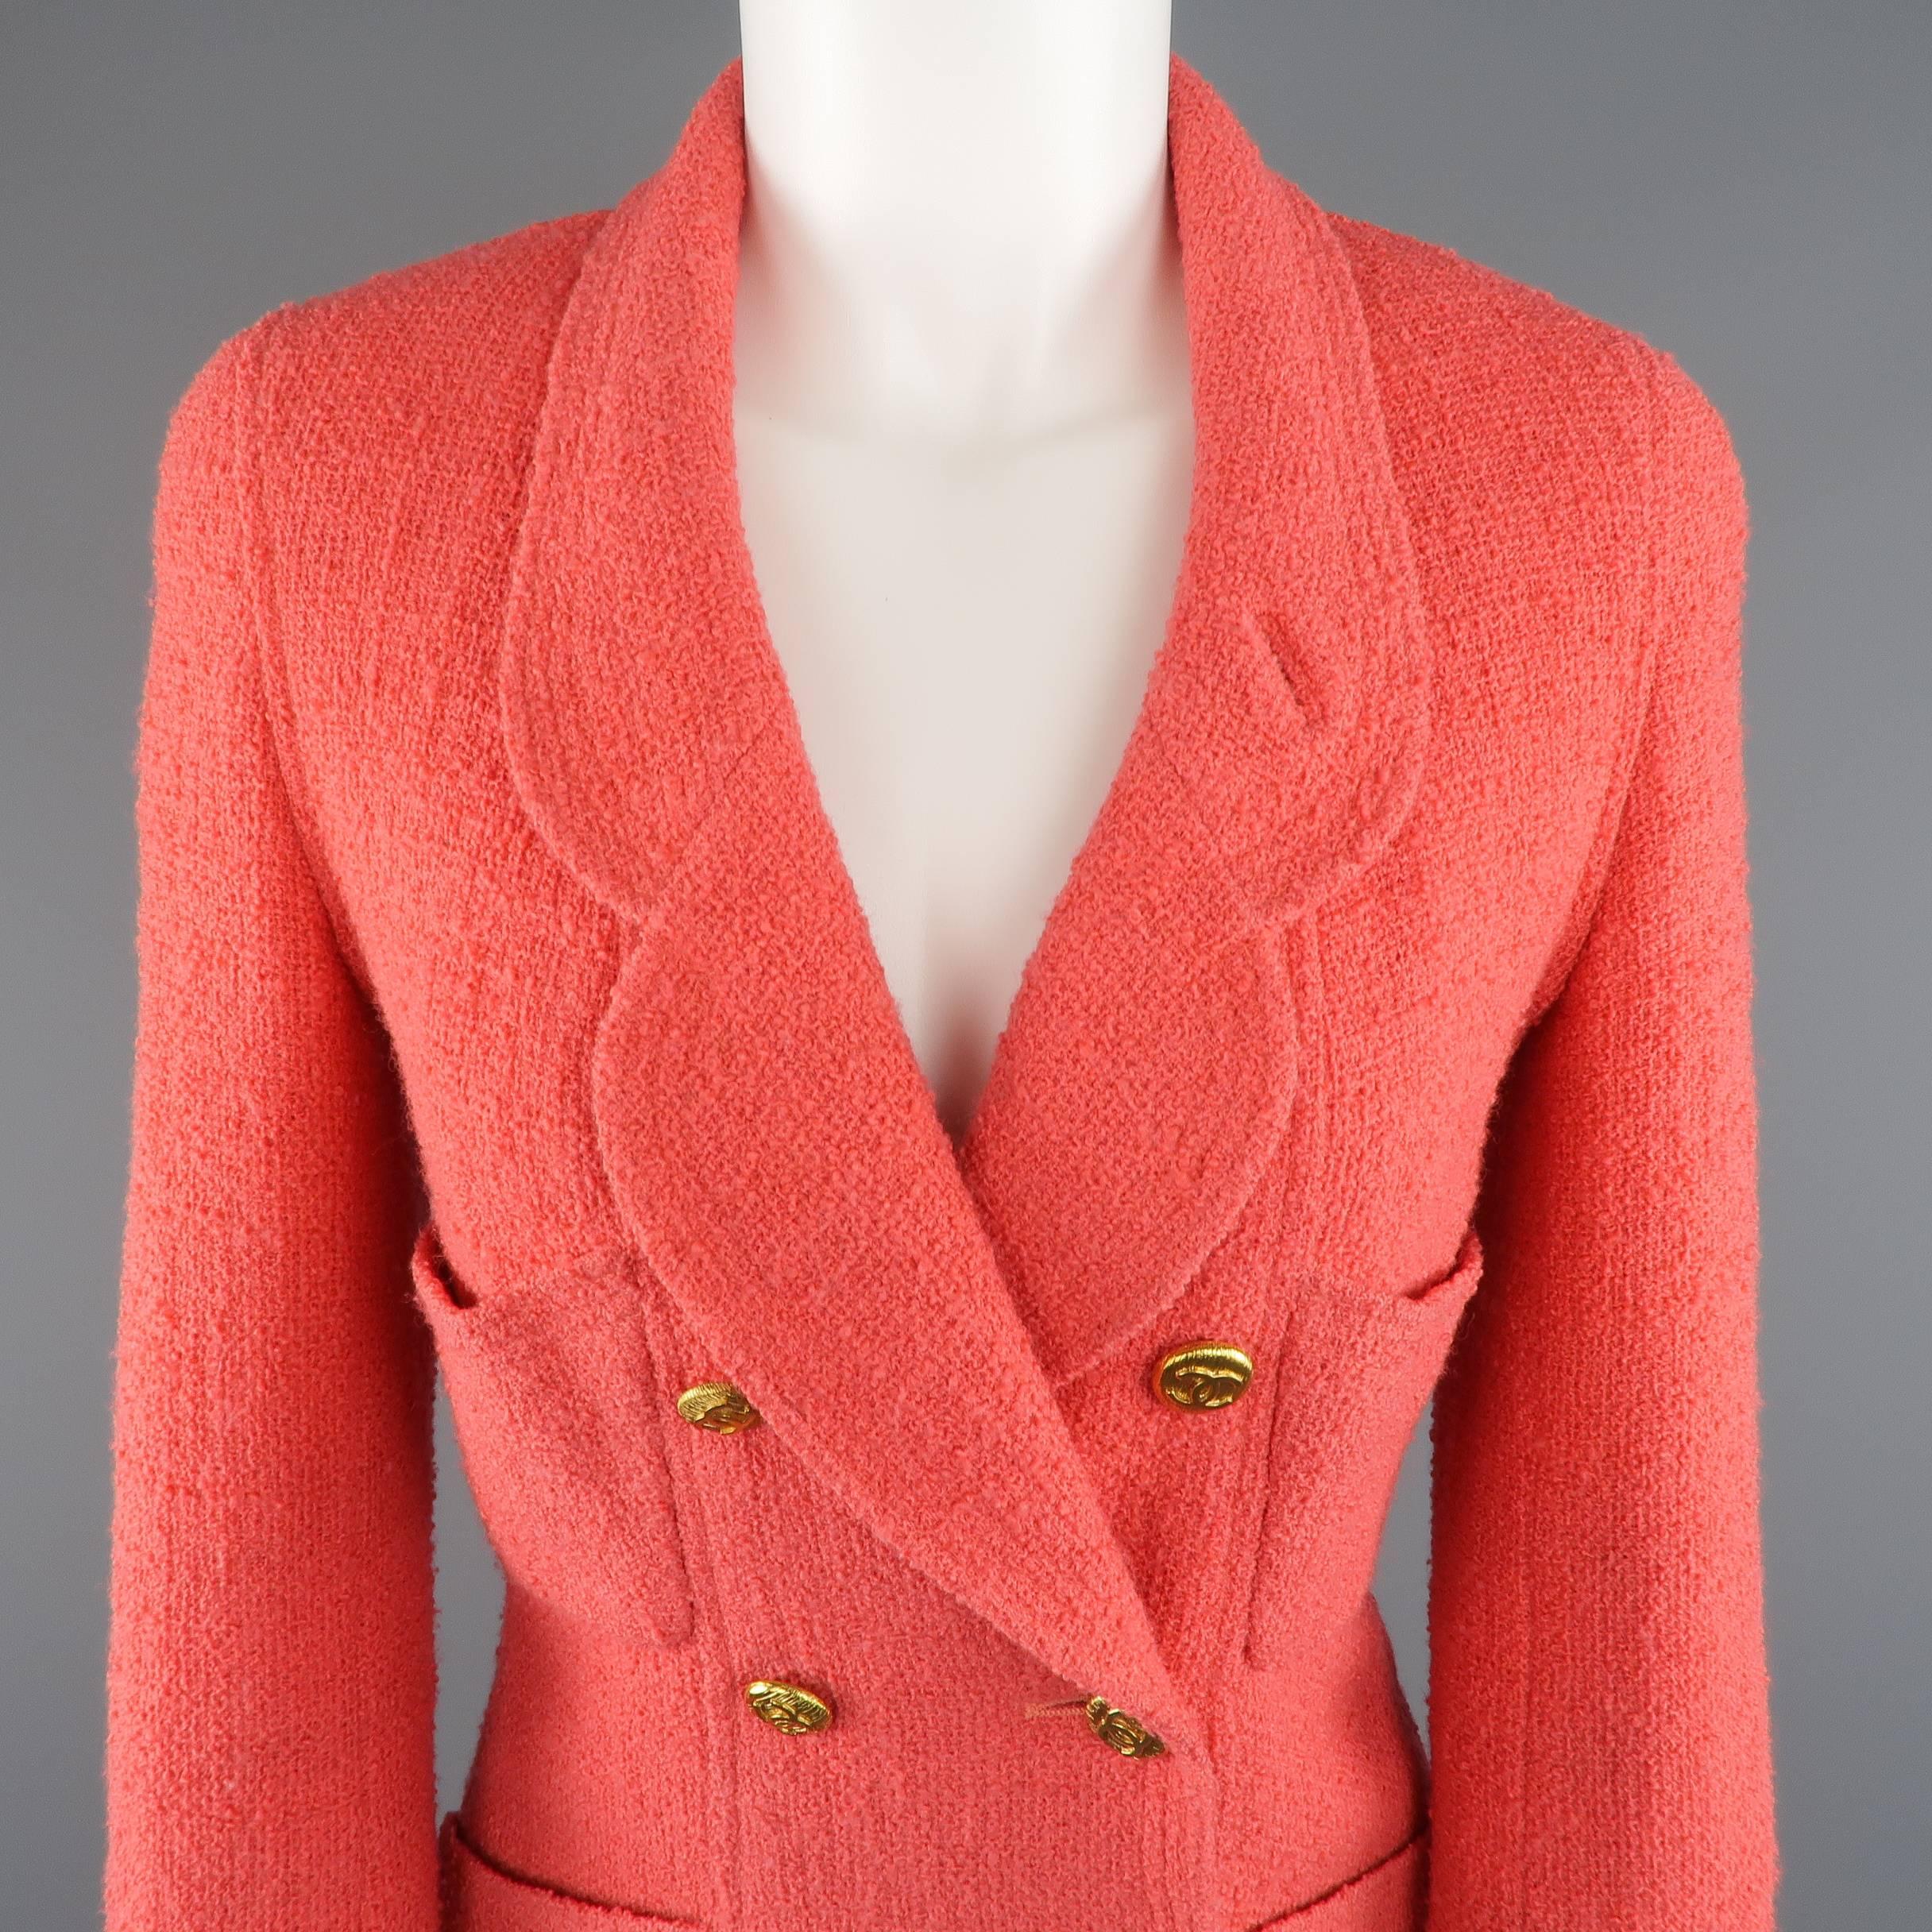 Vintage 1980's CHANEL jacket comes in a gorgeous coral wool tweed boucle and features a rounded lapel, double breasted front with iconic yellow gold tone CC buttons, patch pockets, and functional button cuffs. Minimal wear. Made in France.
